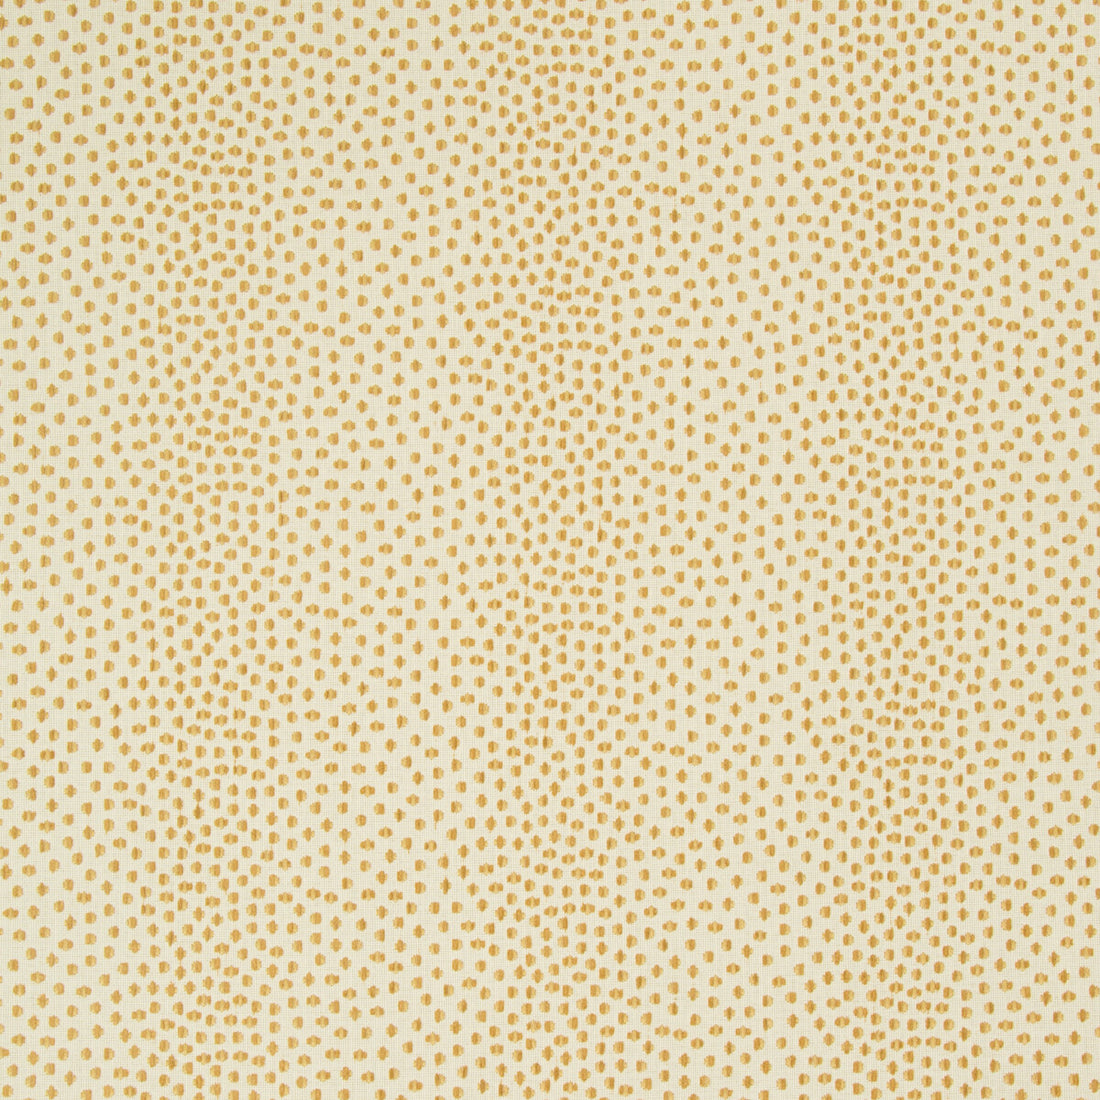 Kravet Contract fabric in 34748-16 color - pattern 34748.16.0 - by Kravet Contract in the Crypton Incase collection